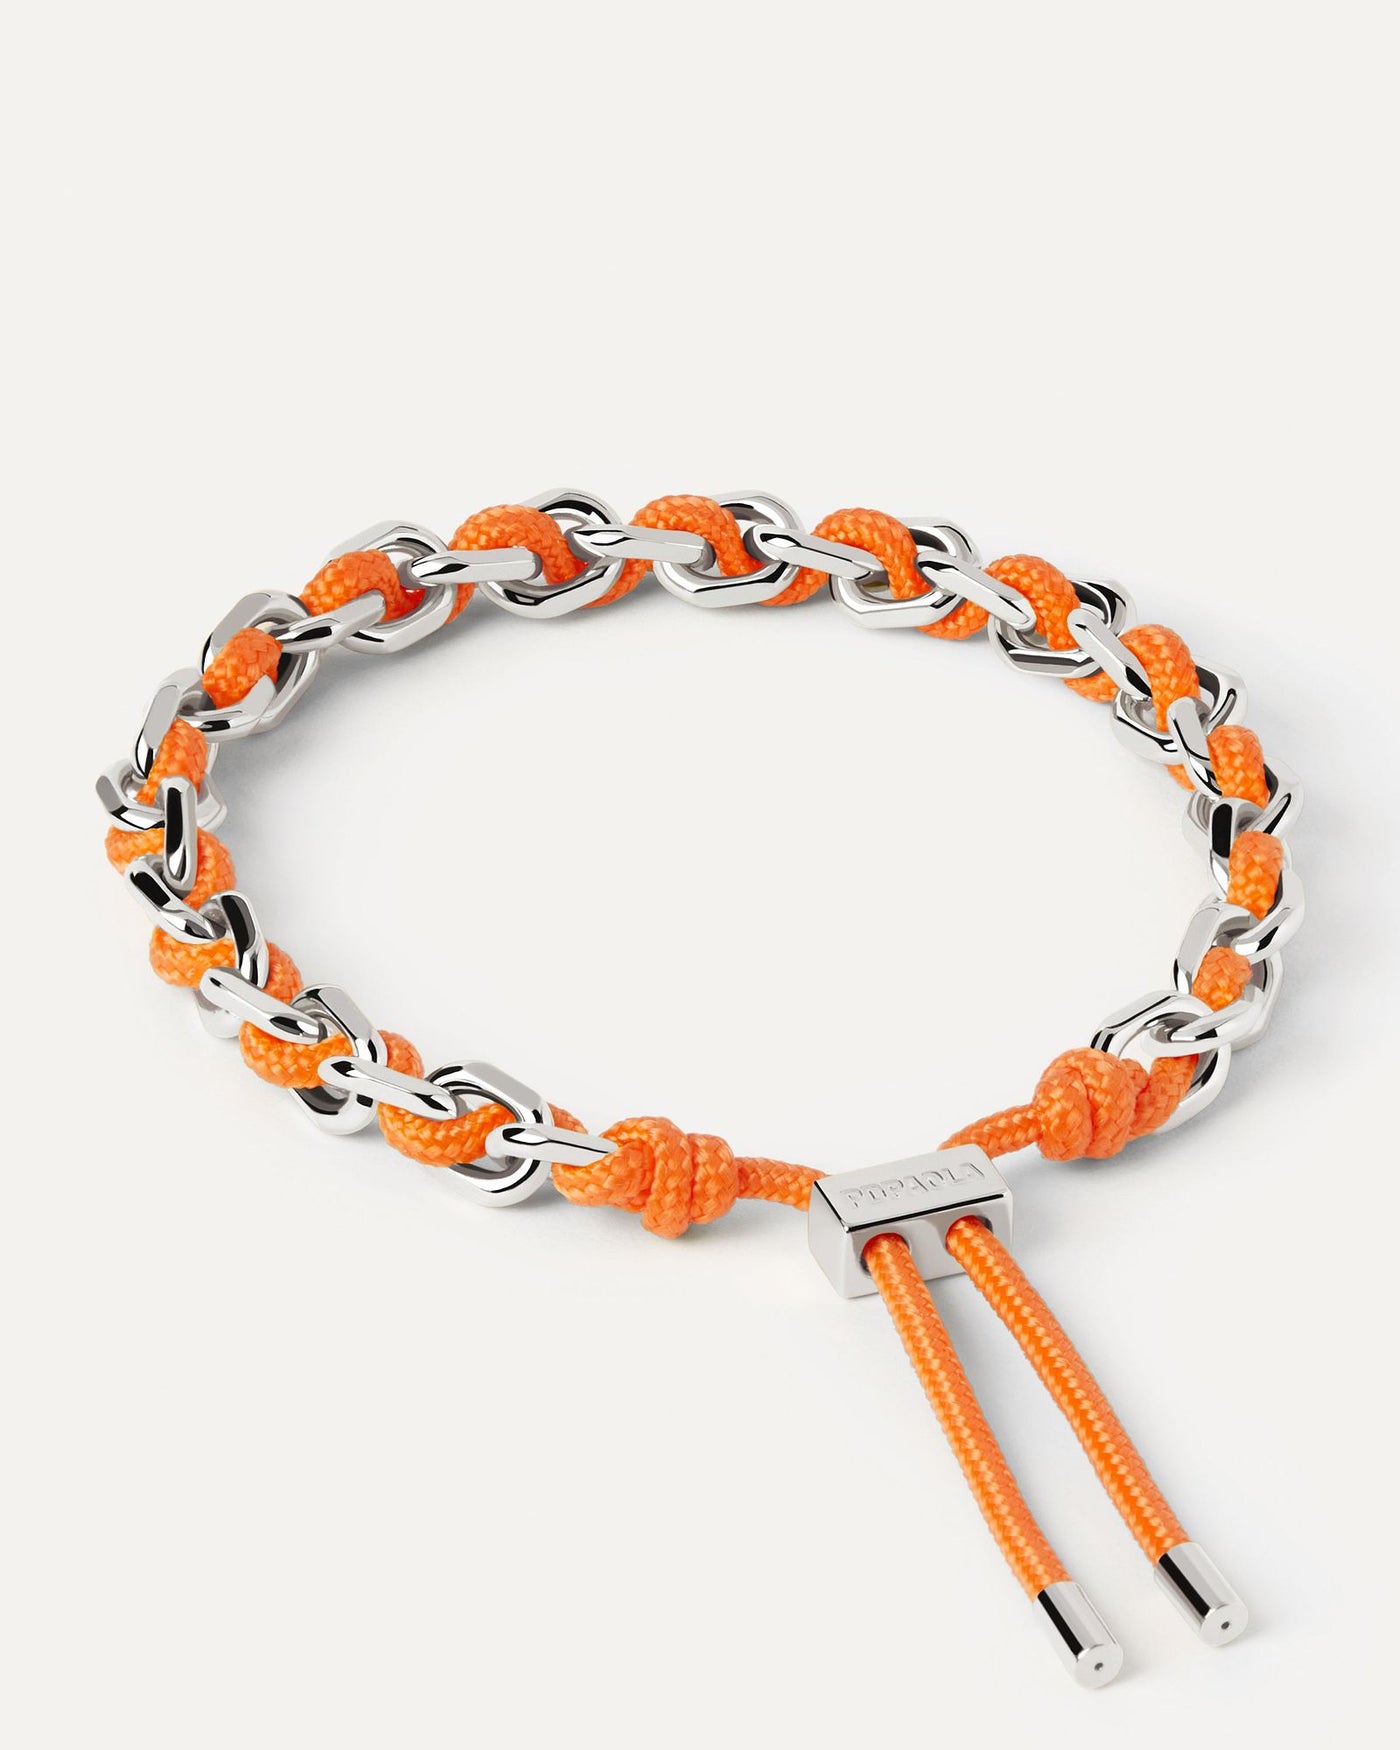 2024 Selection | Tangerine Rope and Chain Silver Bracelet. Silver chain bracelet with an orange rope adjustable sliding clasp. Get the latest arrival from PDPAOLA. Place your order safely and get this Best Seller. Free Shipping.